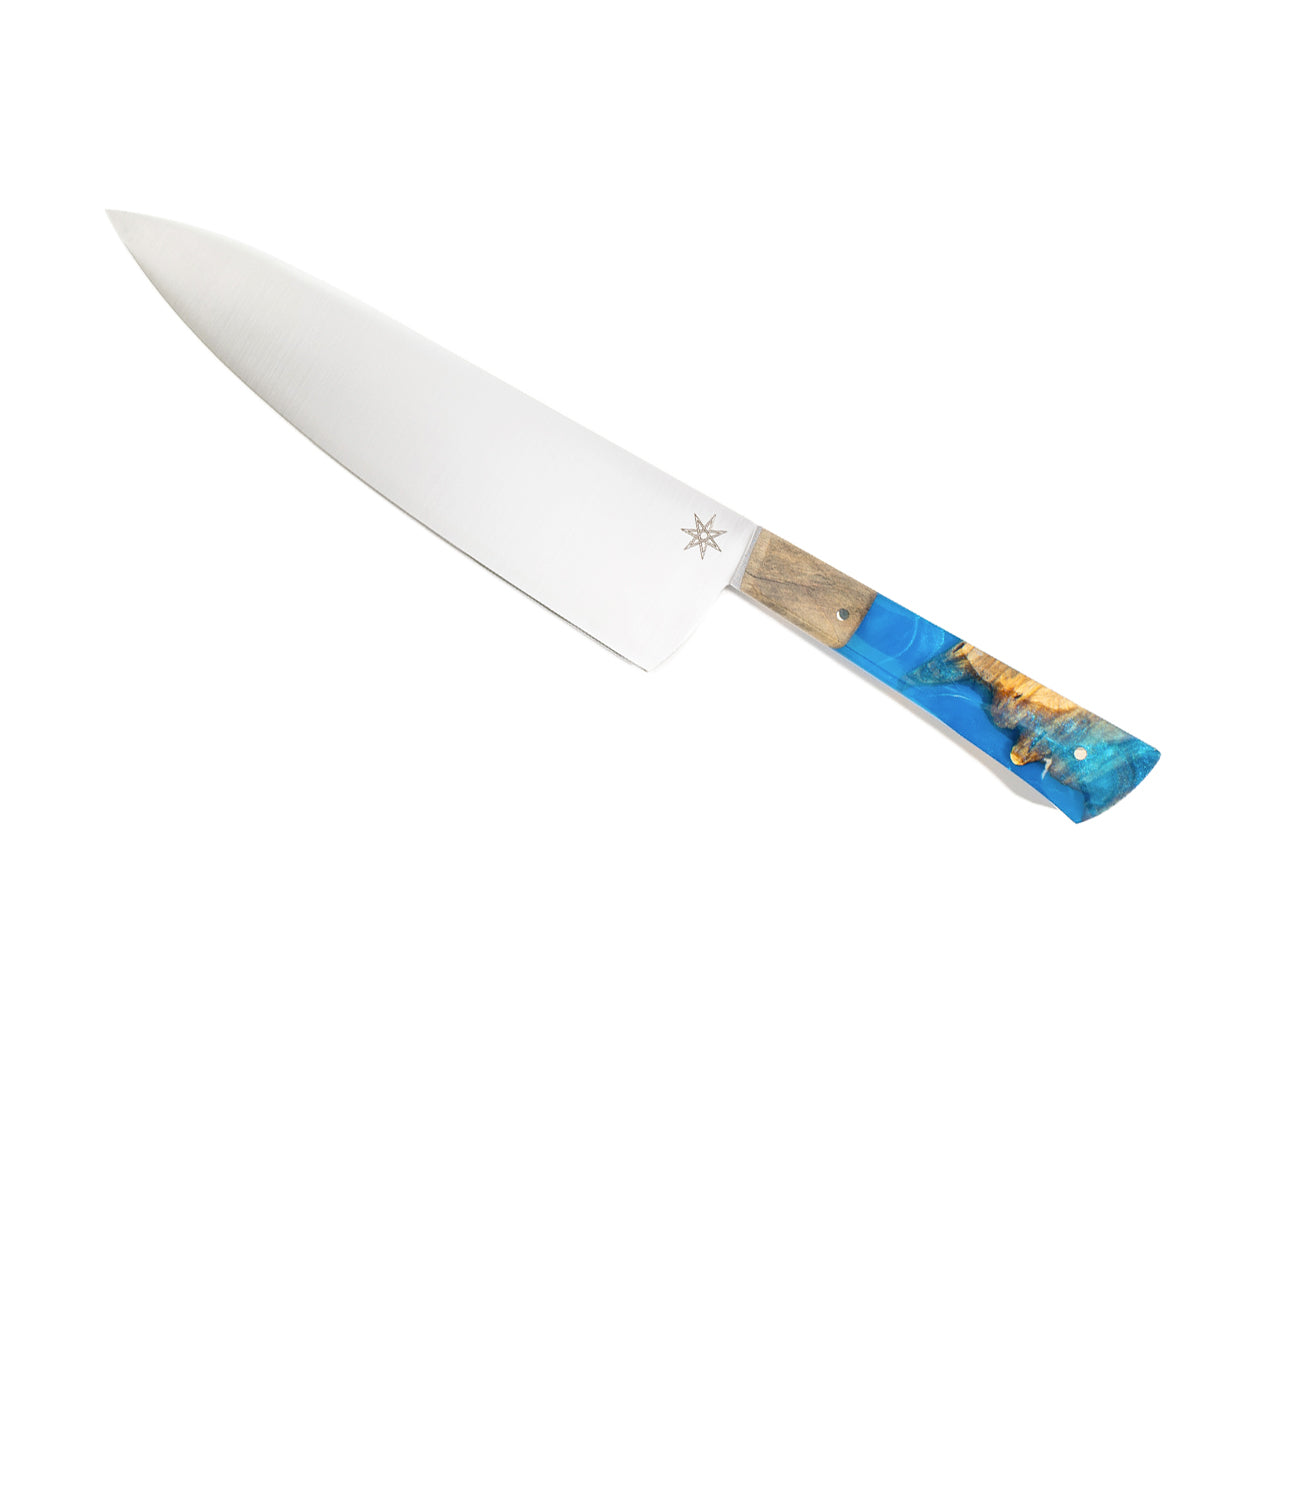 Town Cutler Tahoe Bliss Chef Knife.